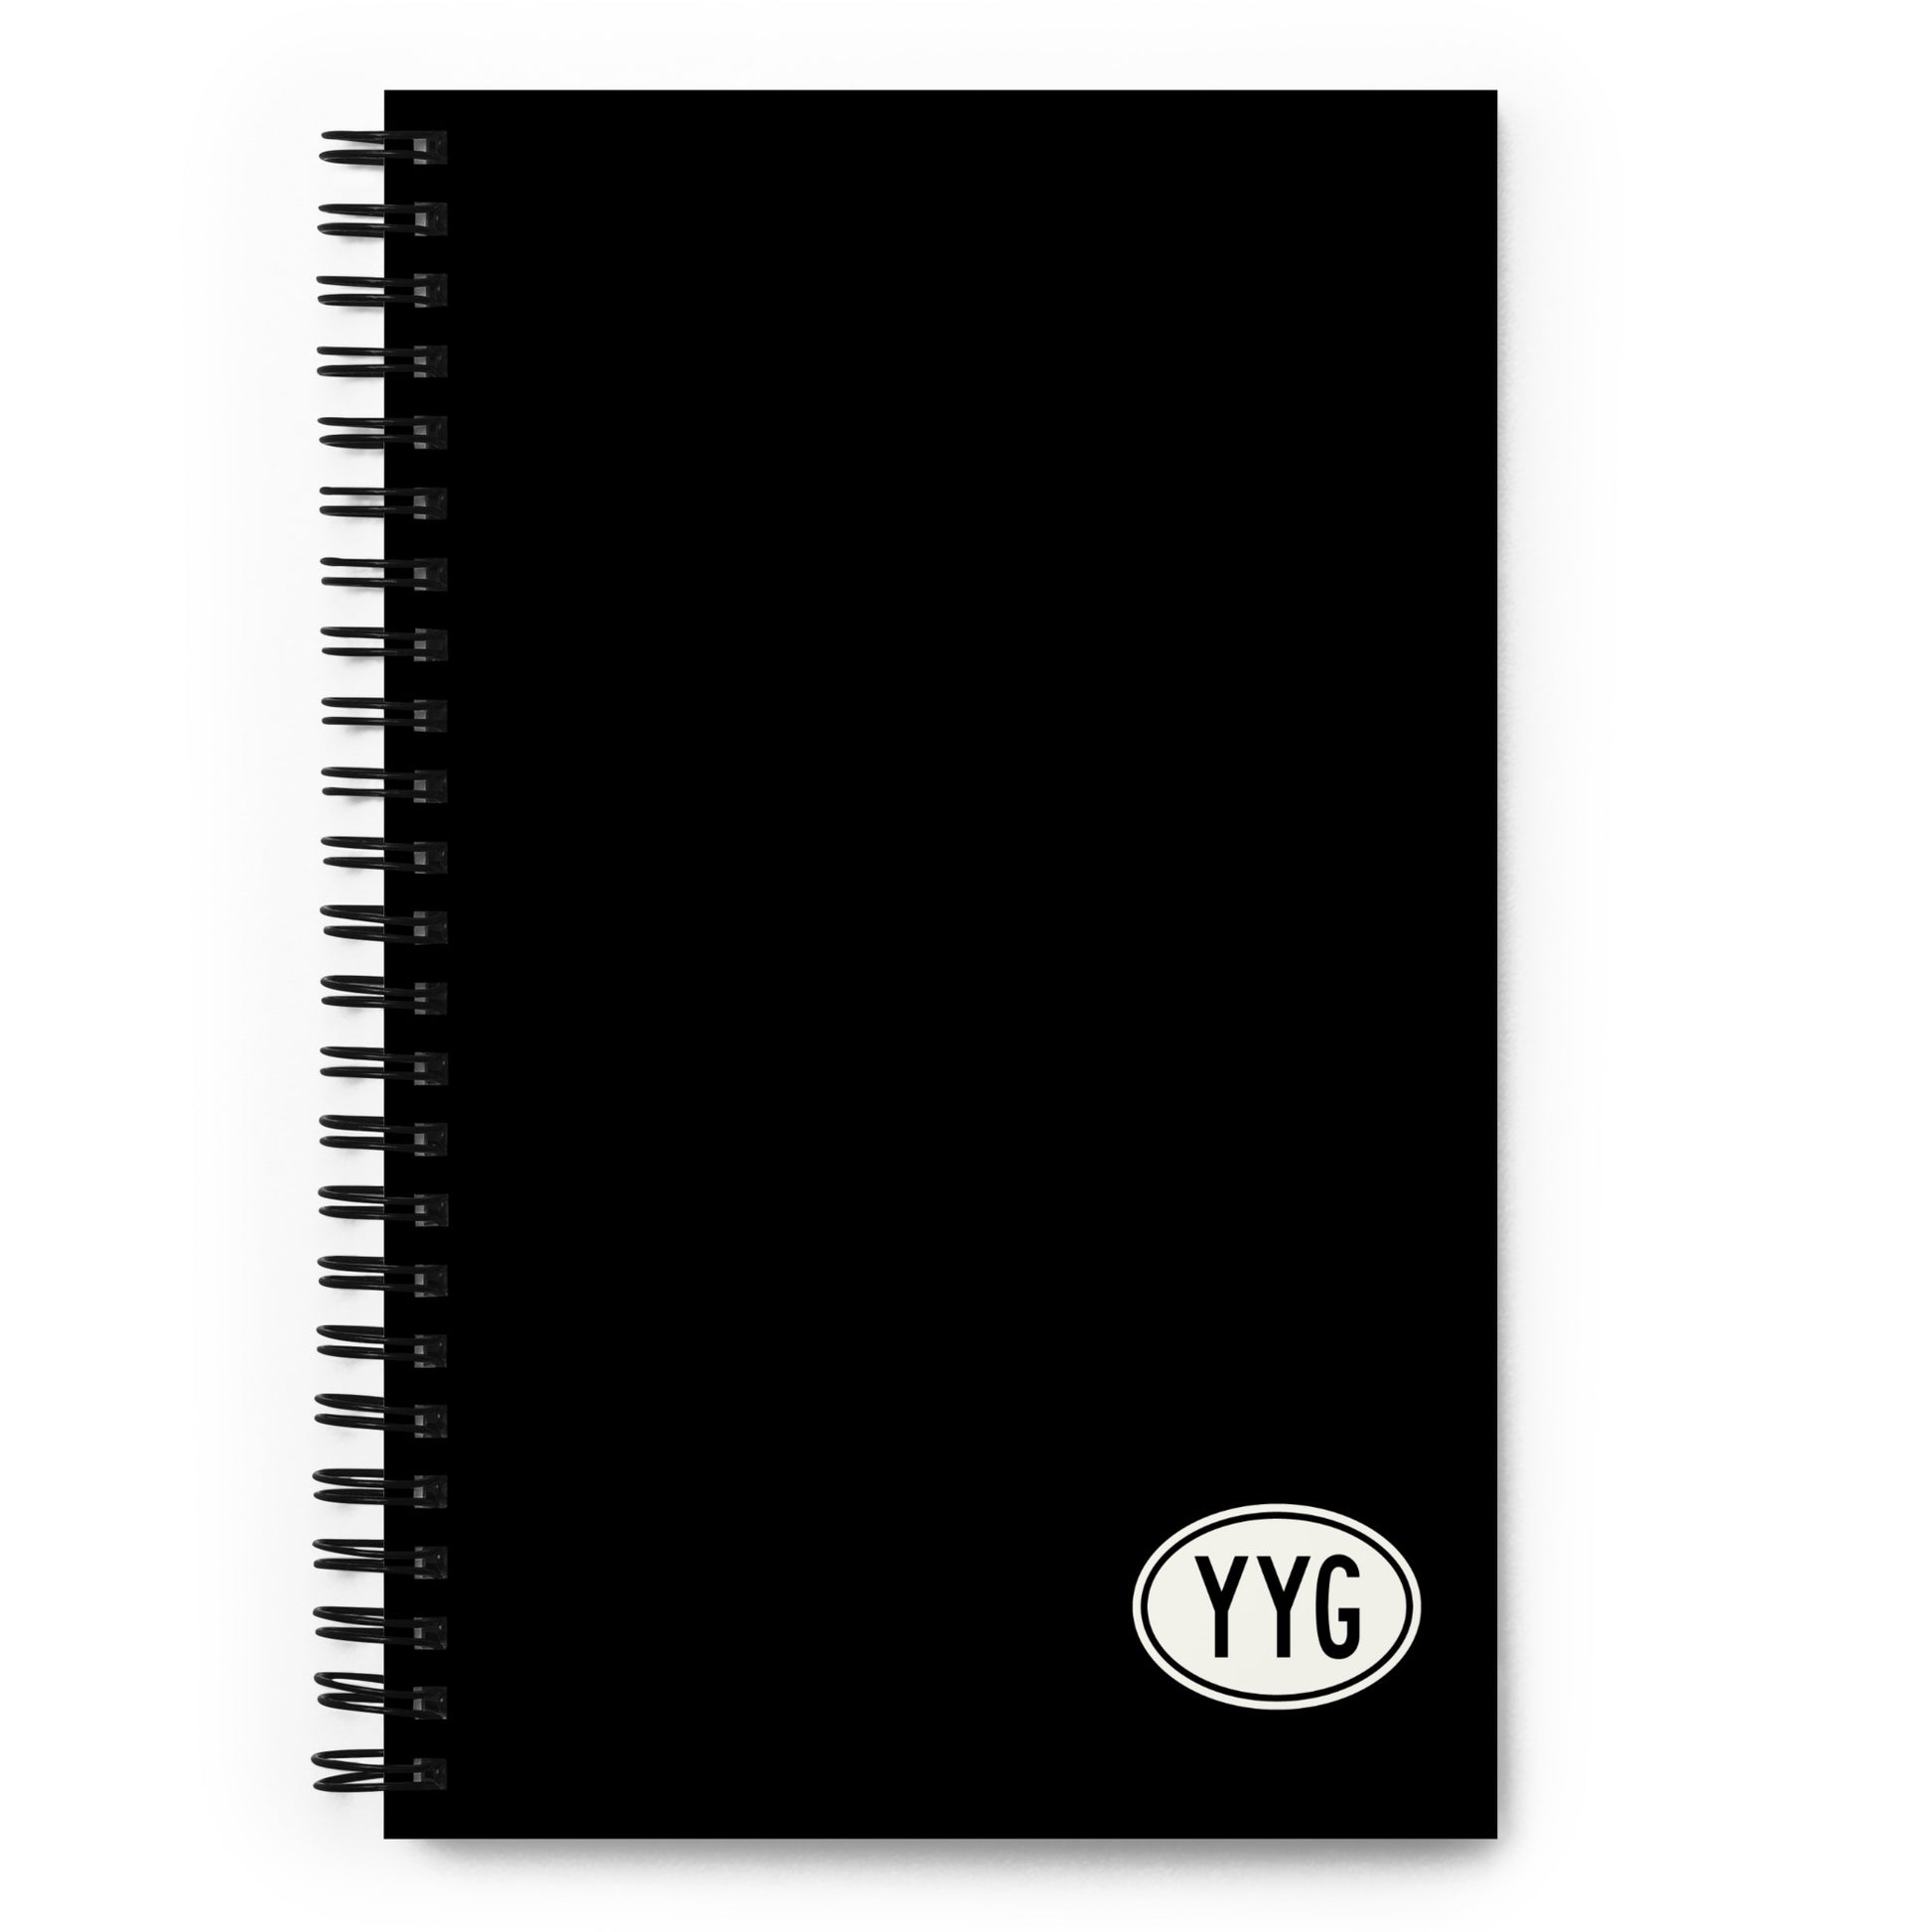 Unique Travel Gift Spiral Notebook - White Oval • YYG Charlottetown • YHM Designs - Image 01